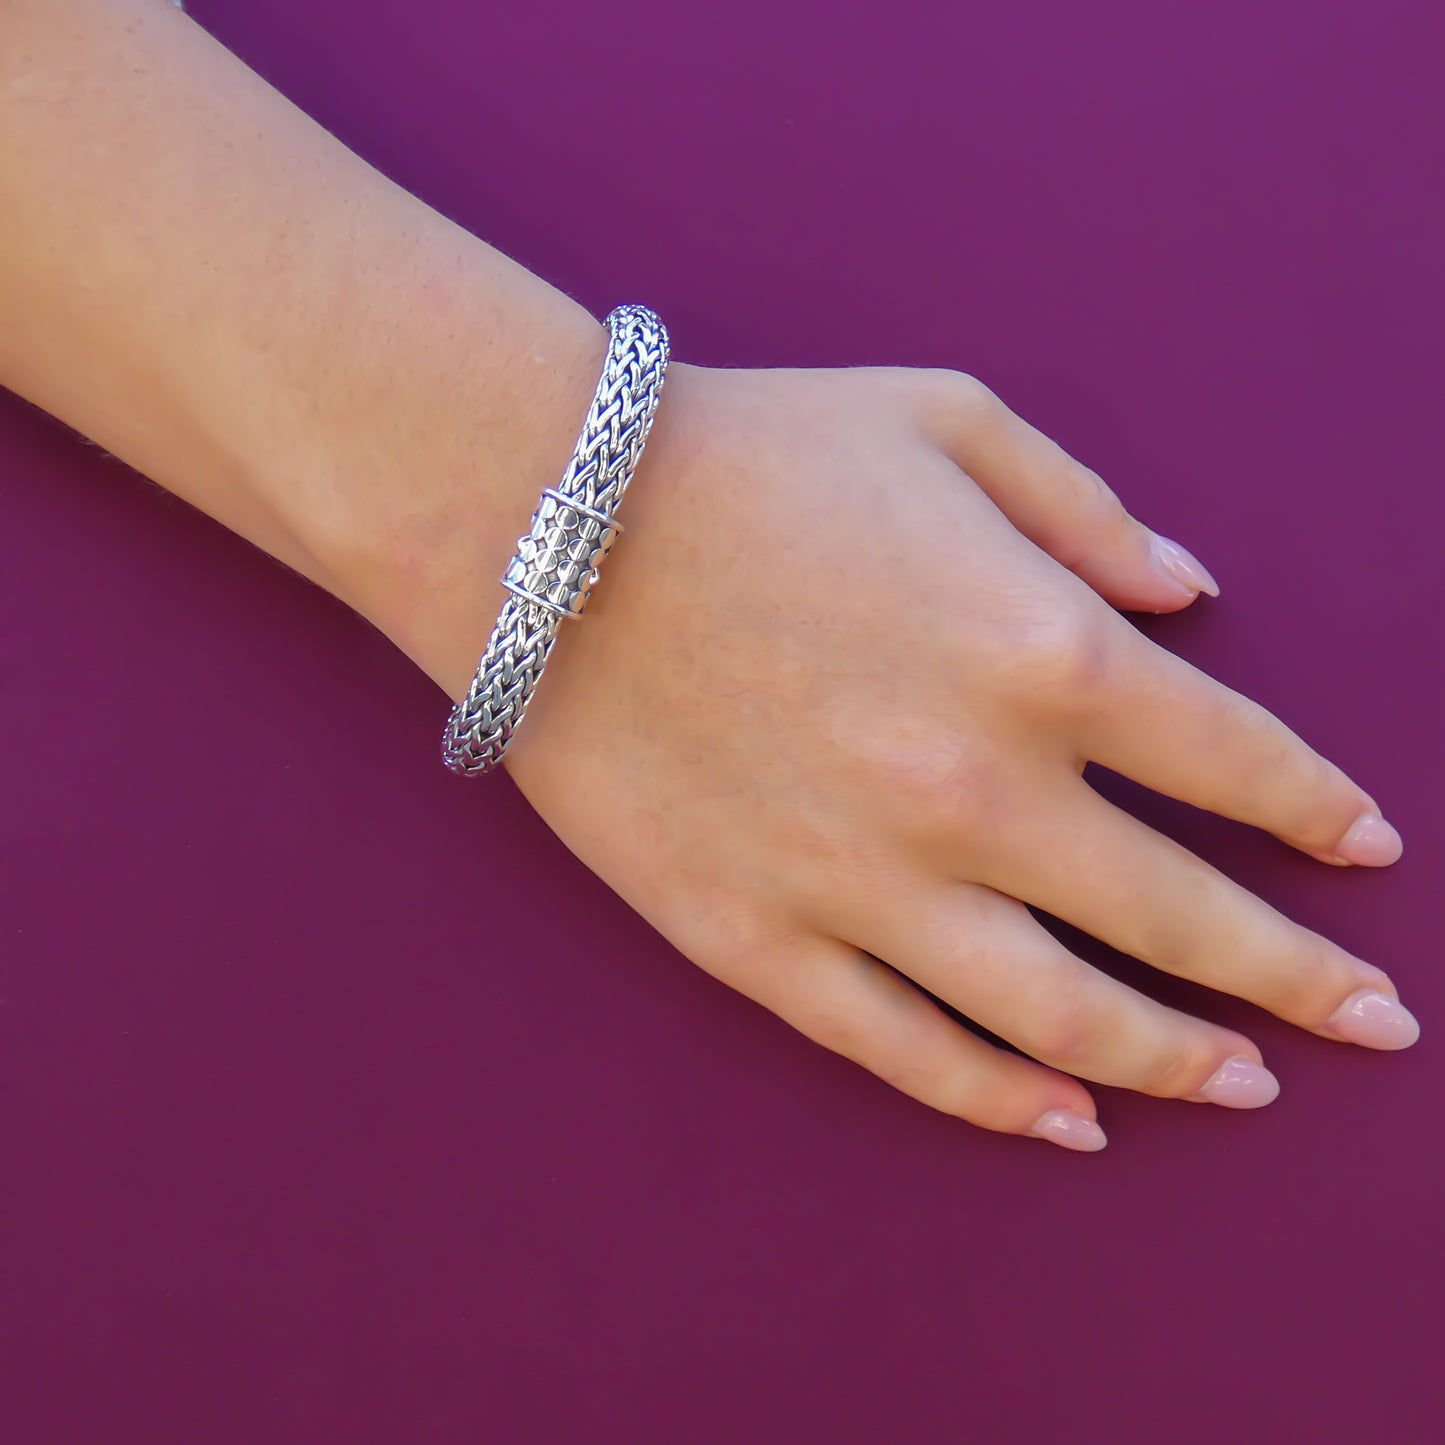 Woman wearing a silver snake chain bracelet with a two button barrel clasp.